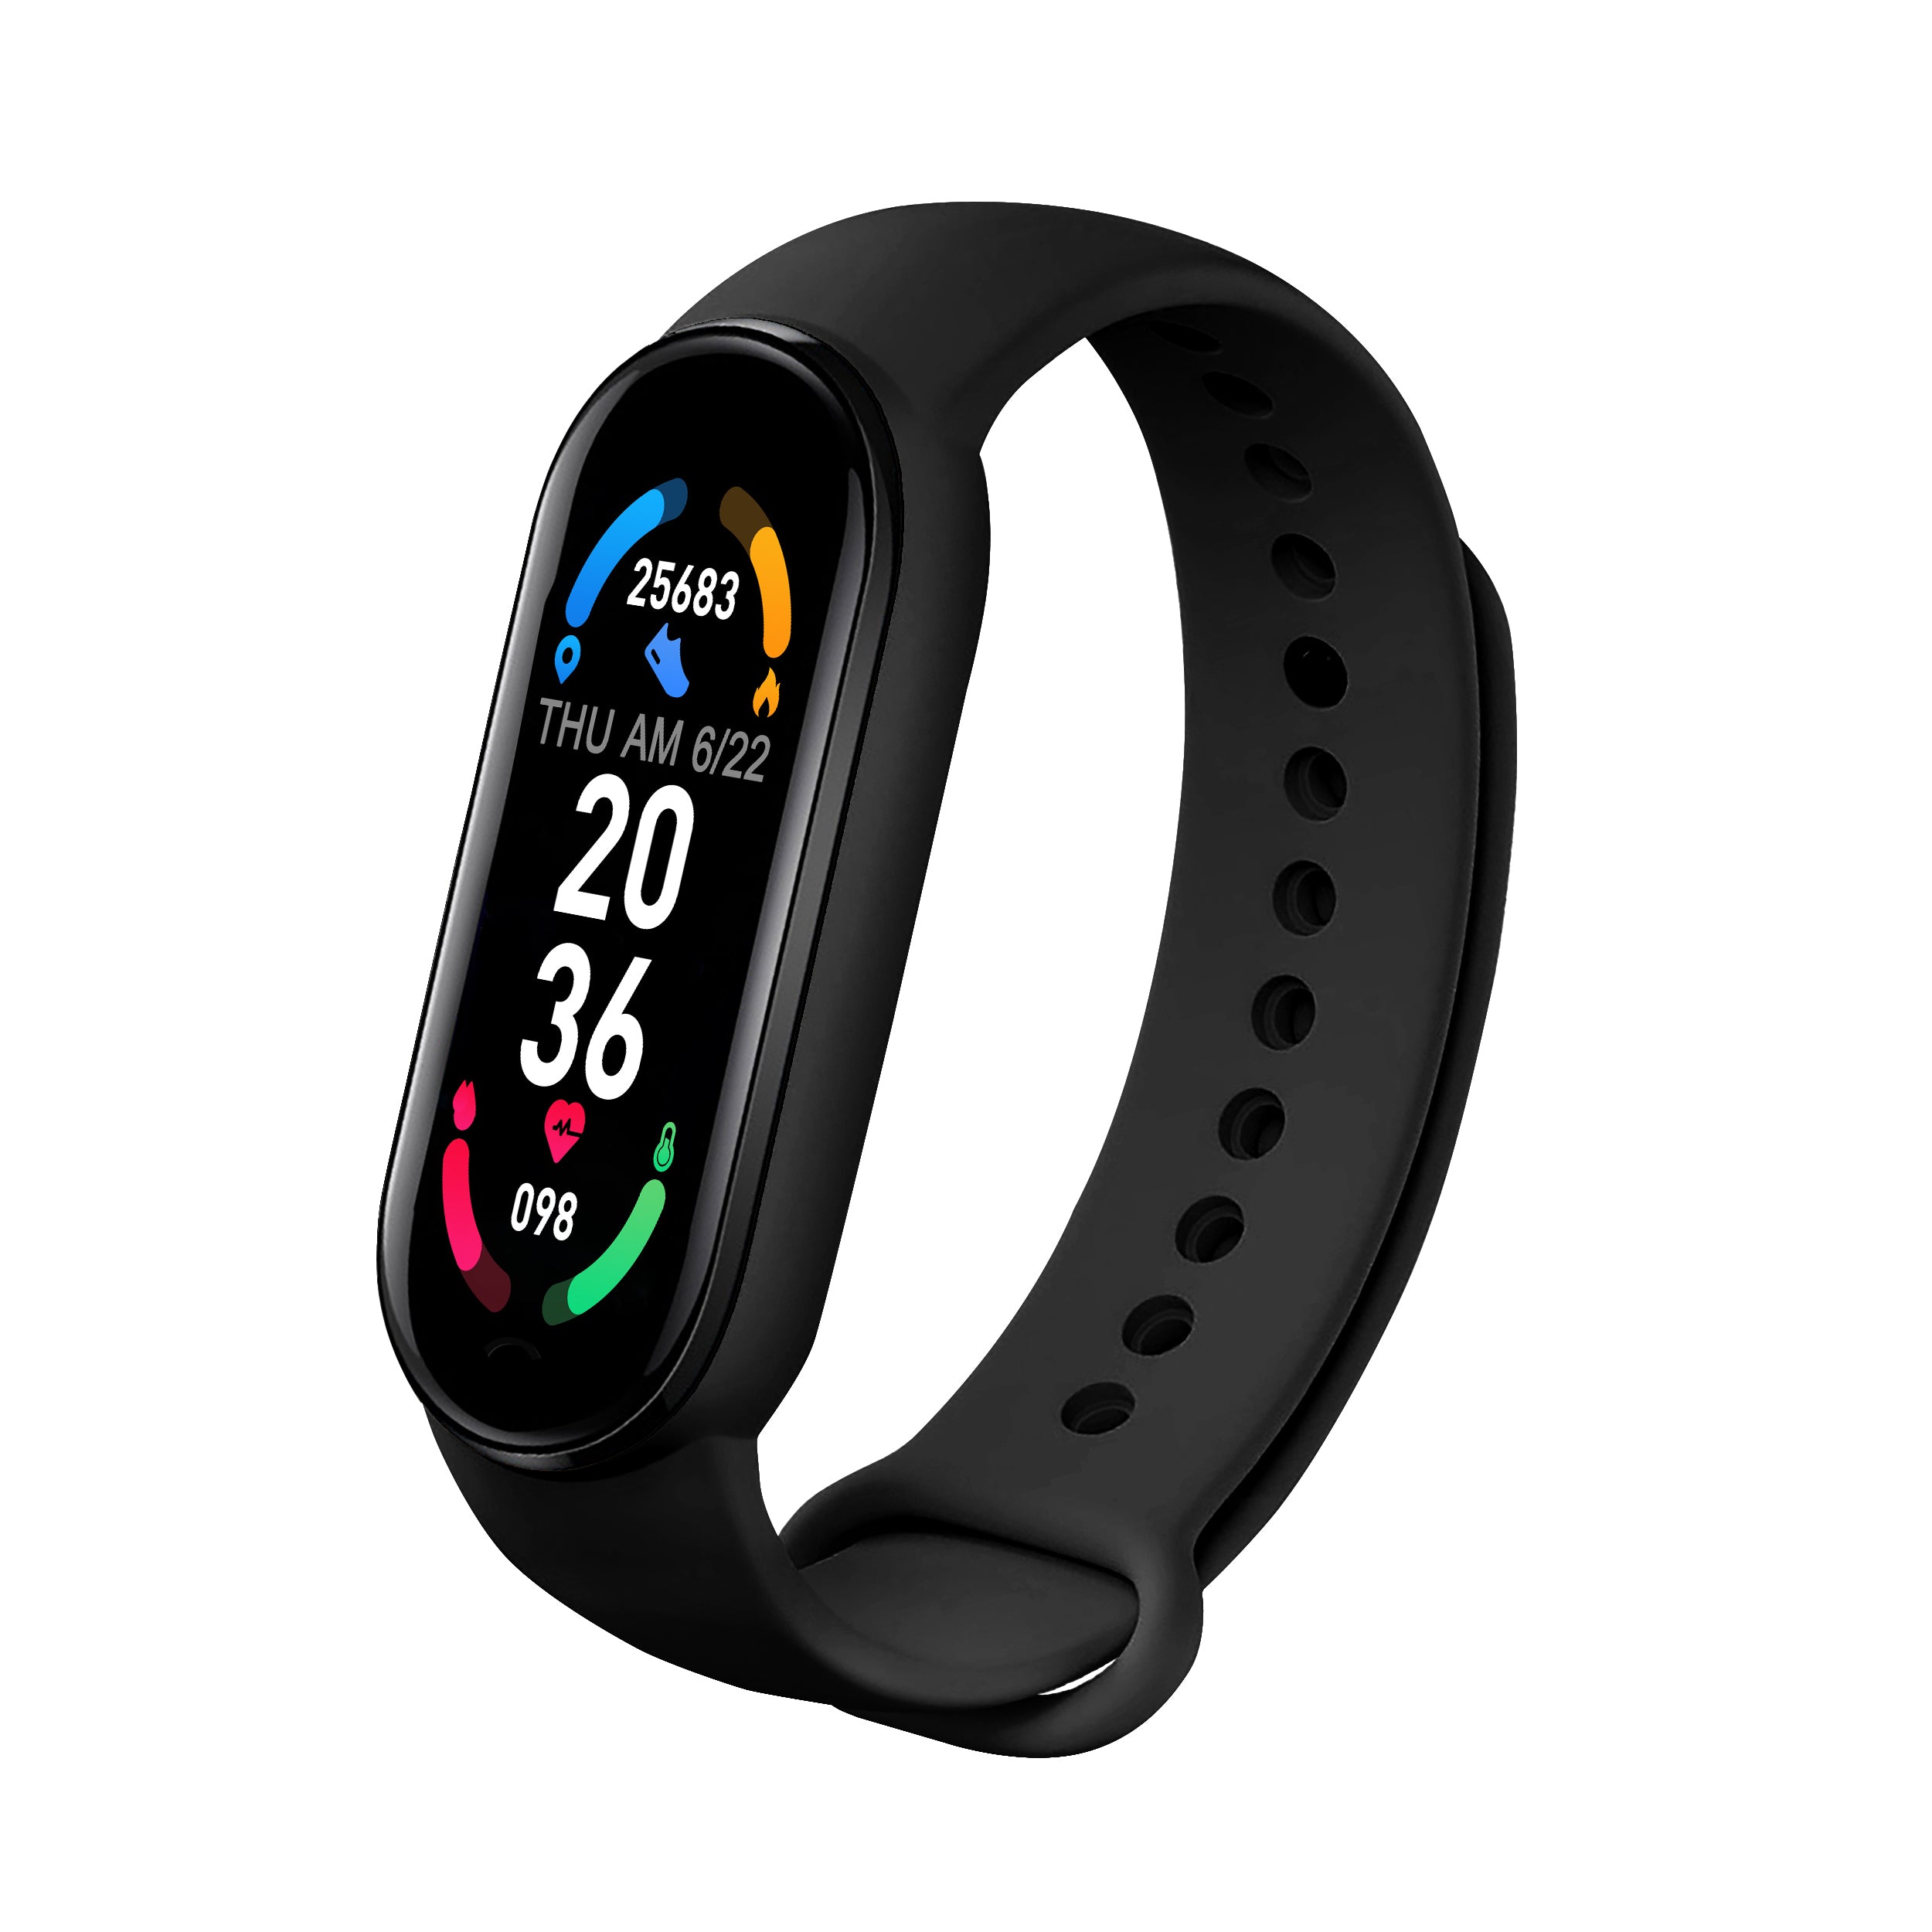 M6 Smart Band Watch - Activity Tracker with Steps, Sleep and Oscilloscope - Black